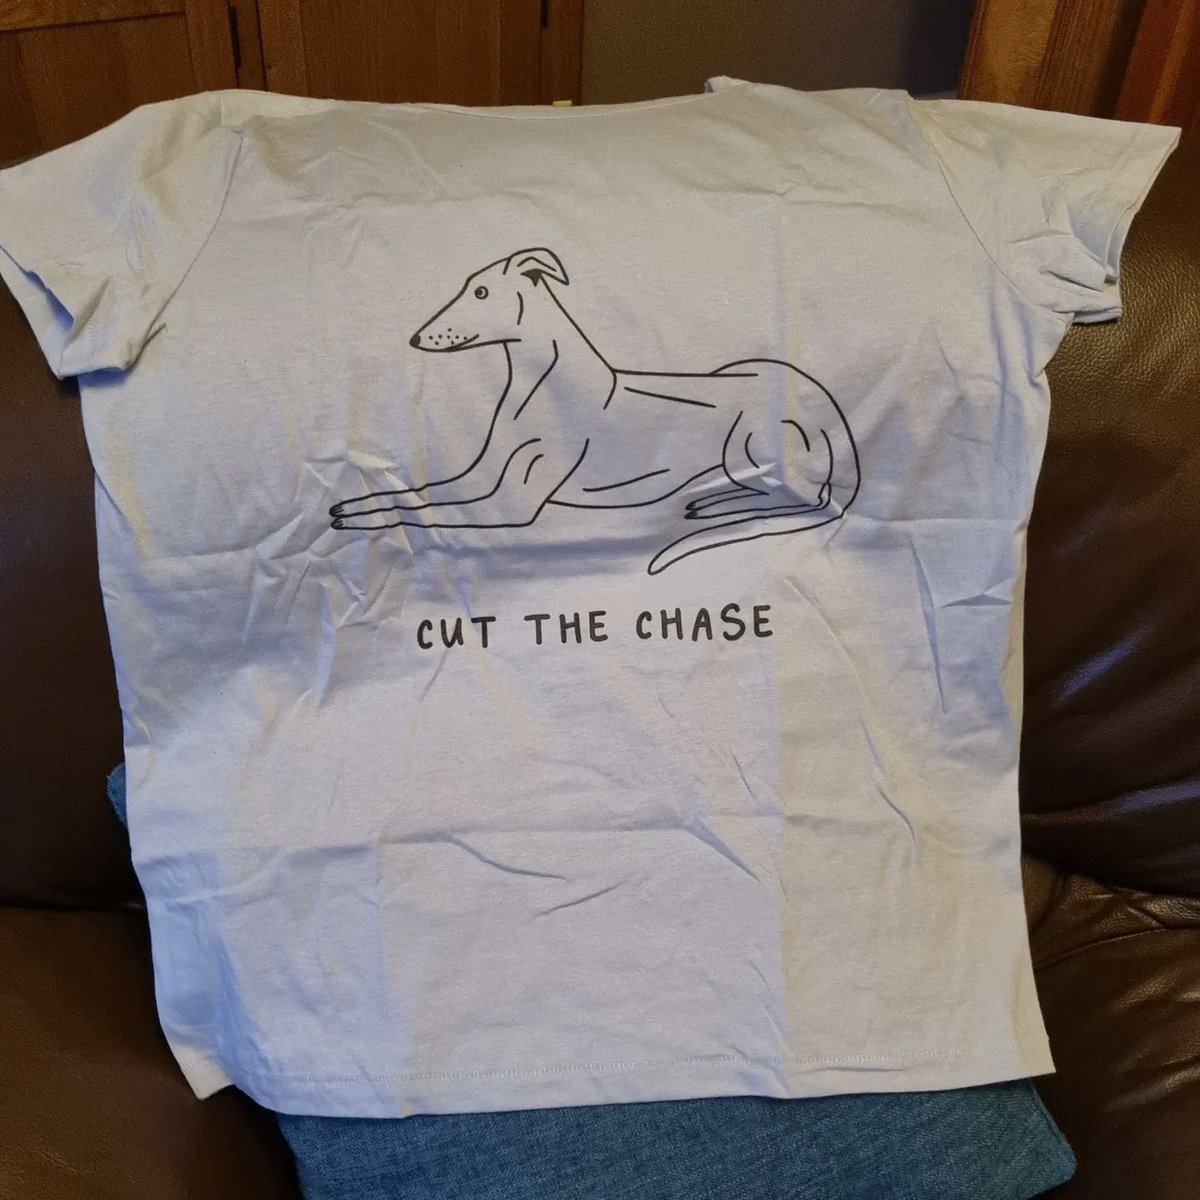 My @RSPCA_official T shirt arrived today in support of the Cut the Chase campaign #cutthechase 
#greyhounds #youbettheydie 
#petsnotbets #rescuednotretired